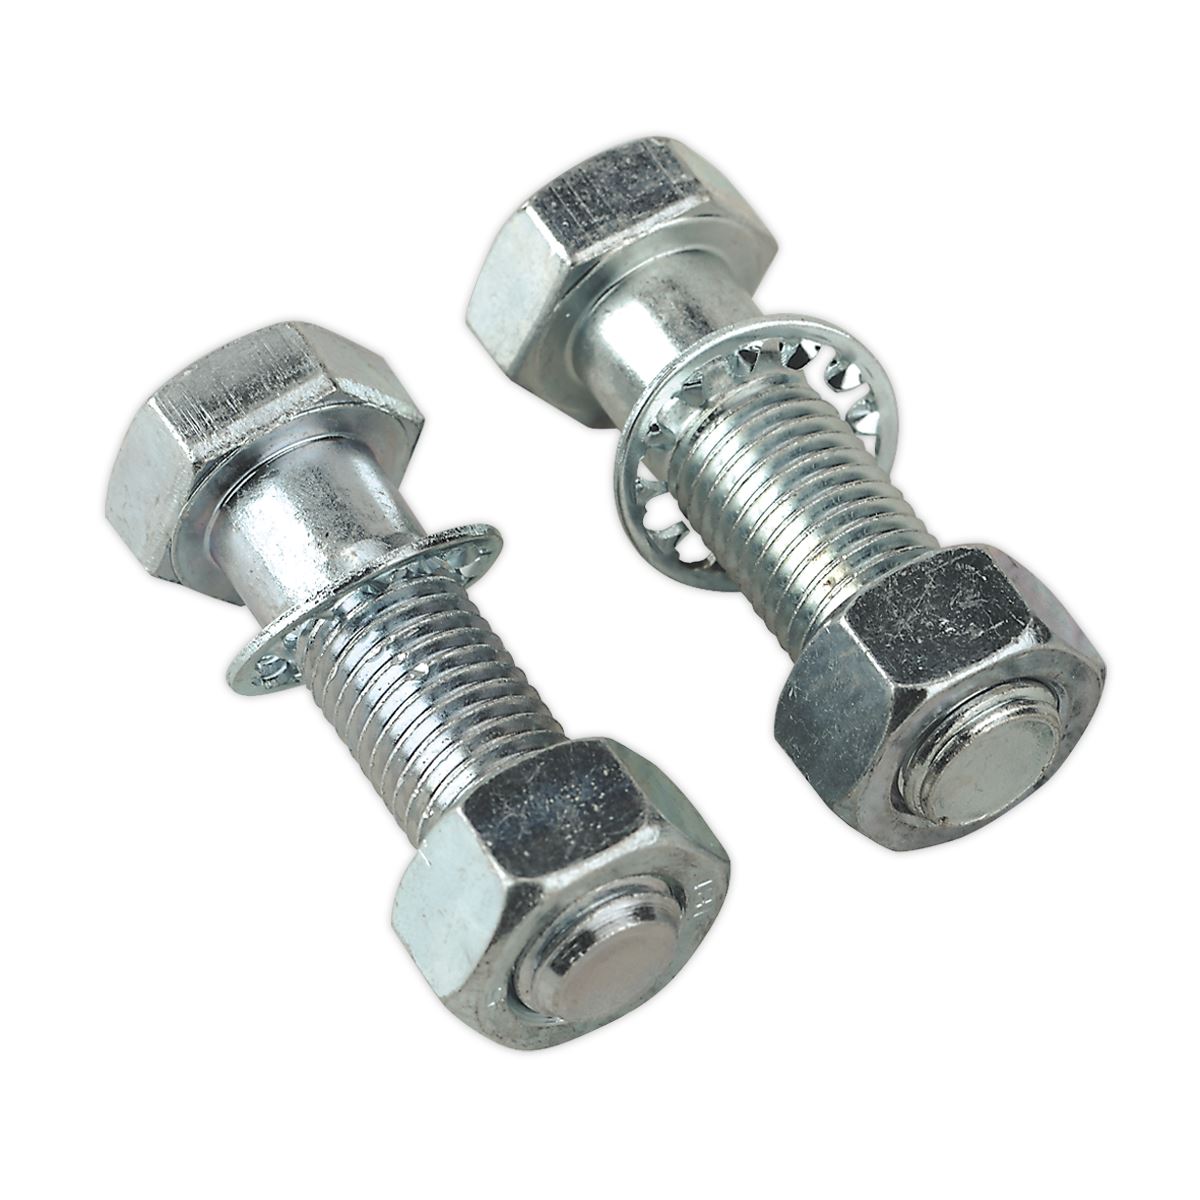 Sealey Tow-Ball Bolts & Nuts M16 x 55mm Pack of 2